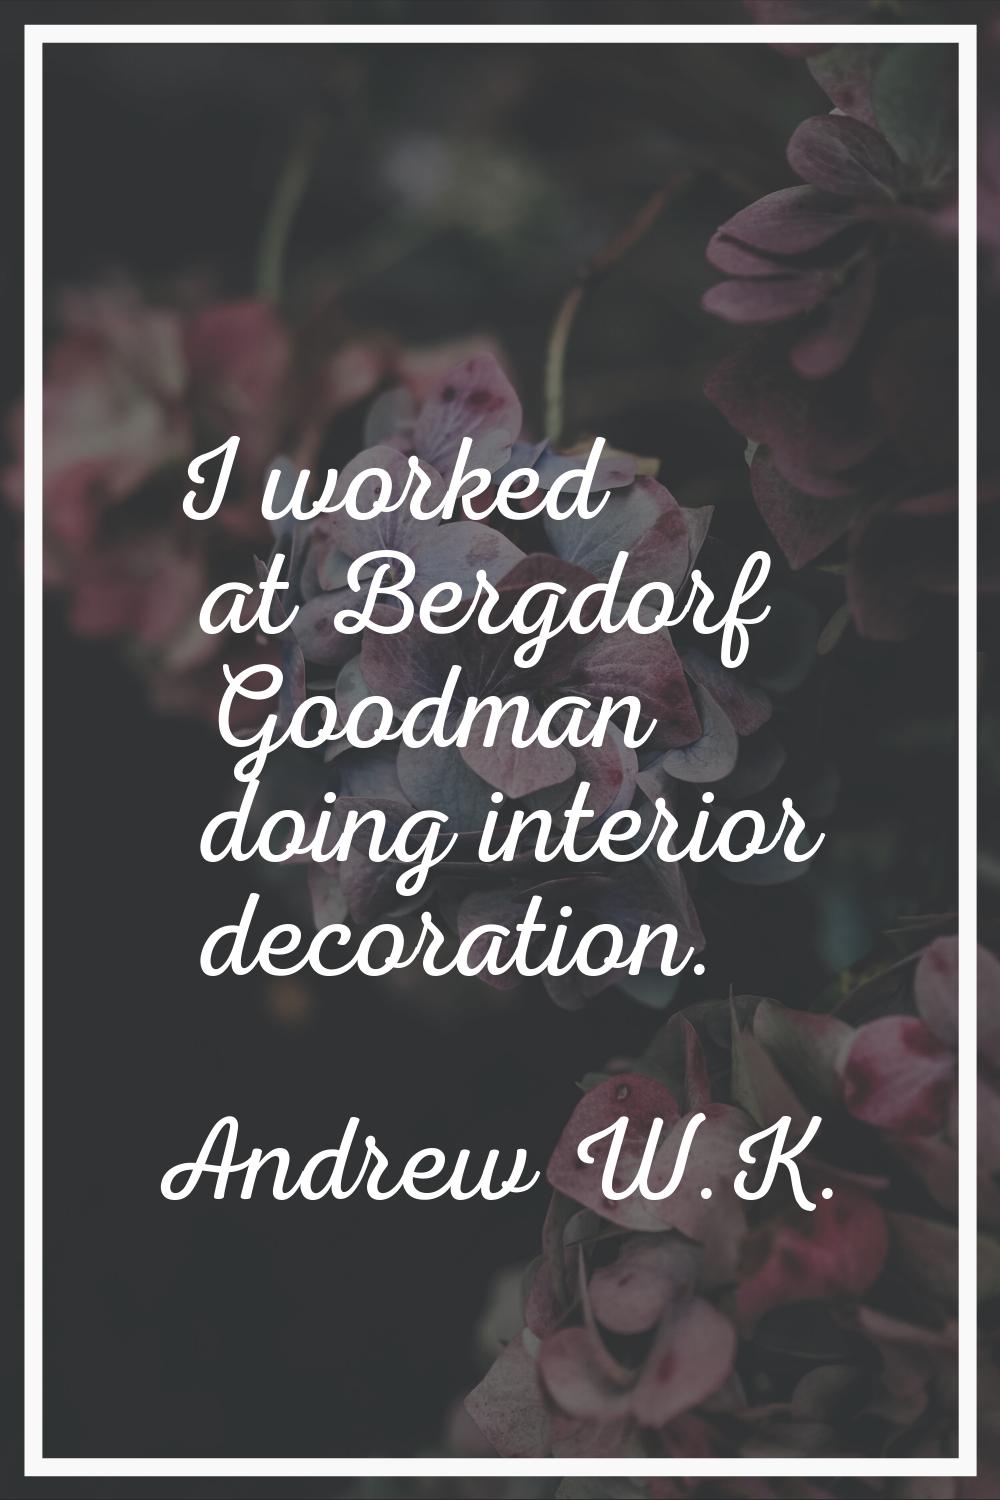 I worked at Bergdorf Goodman doing interior decoration.